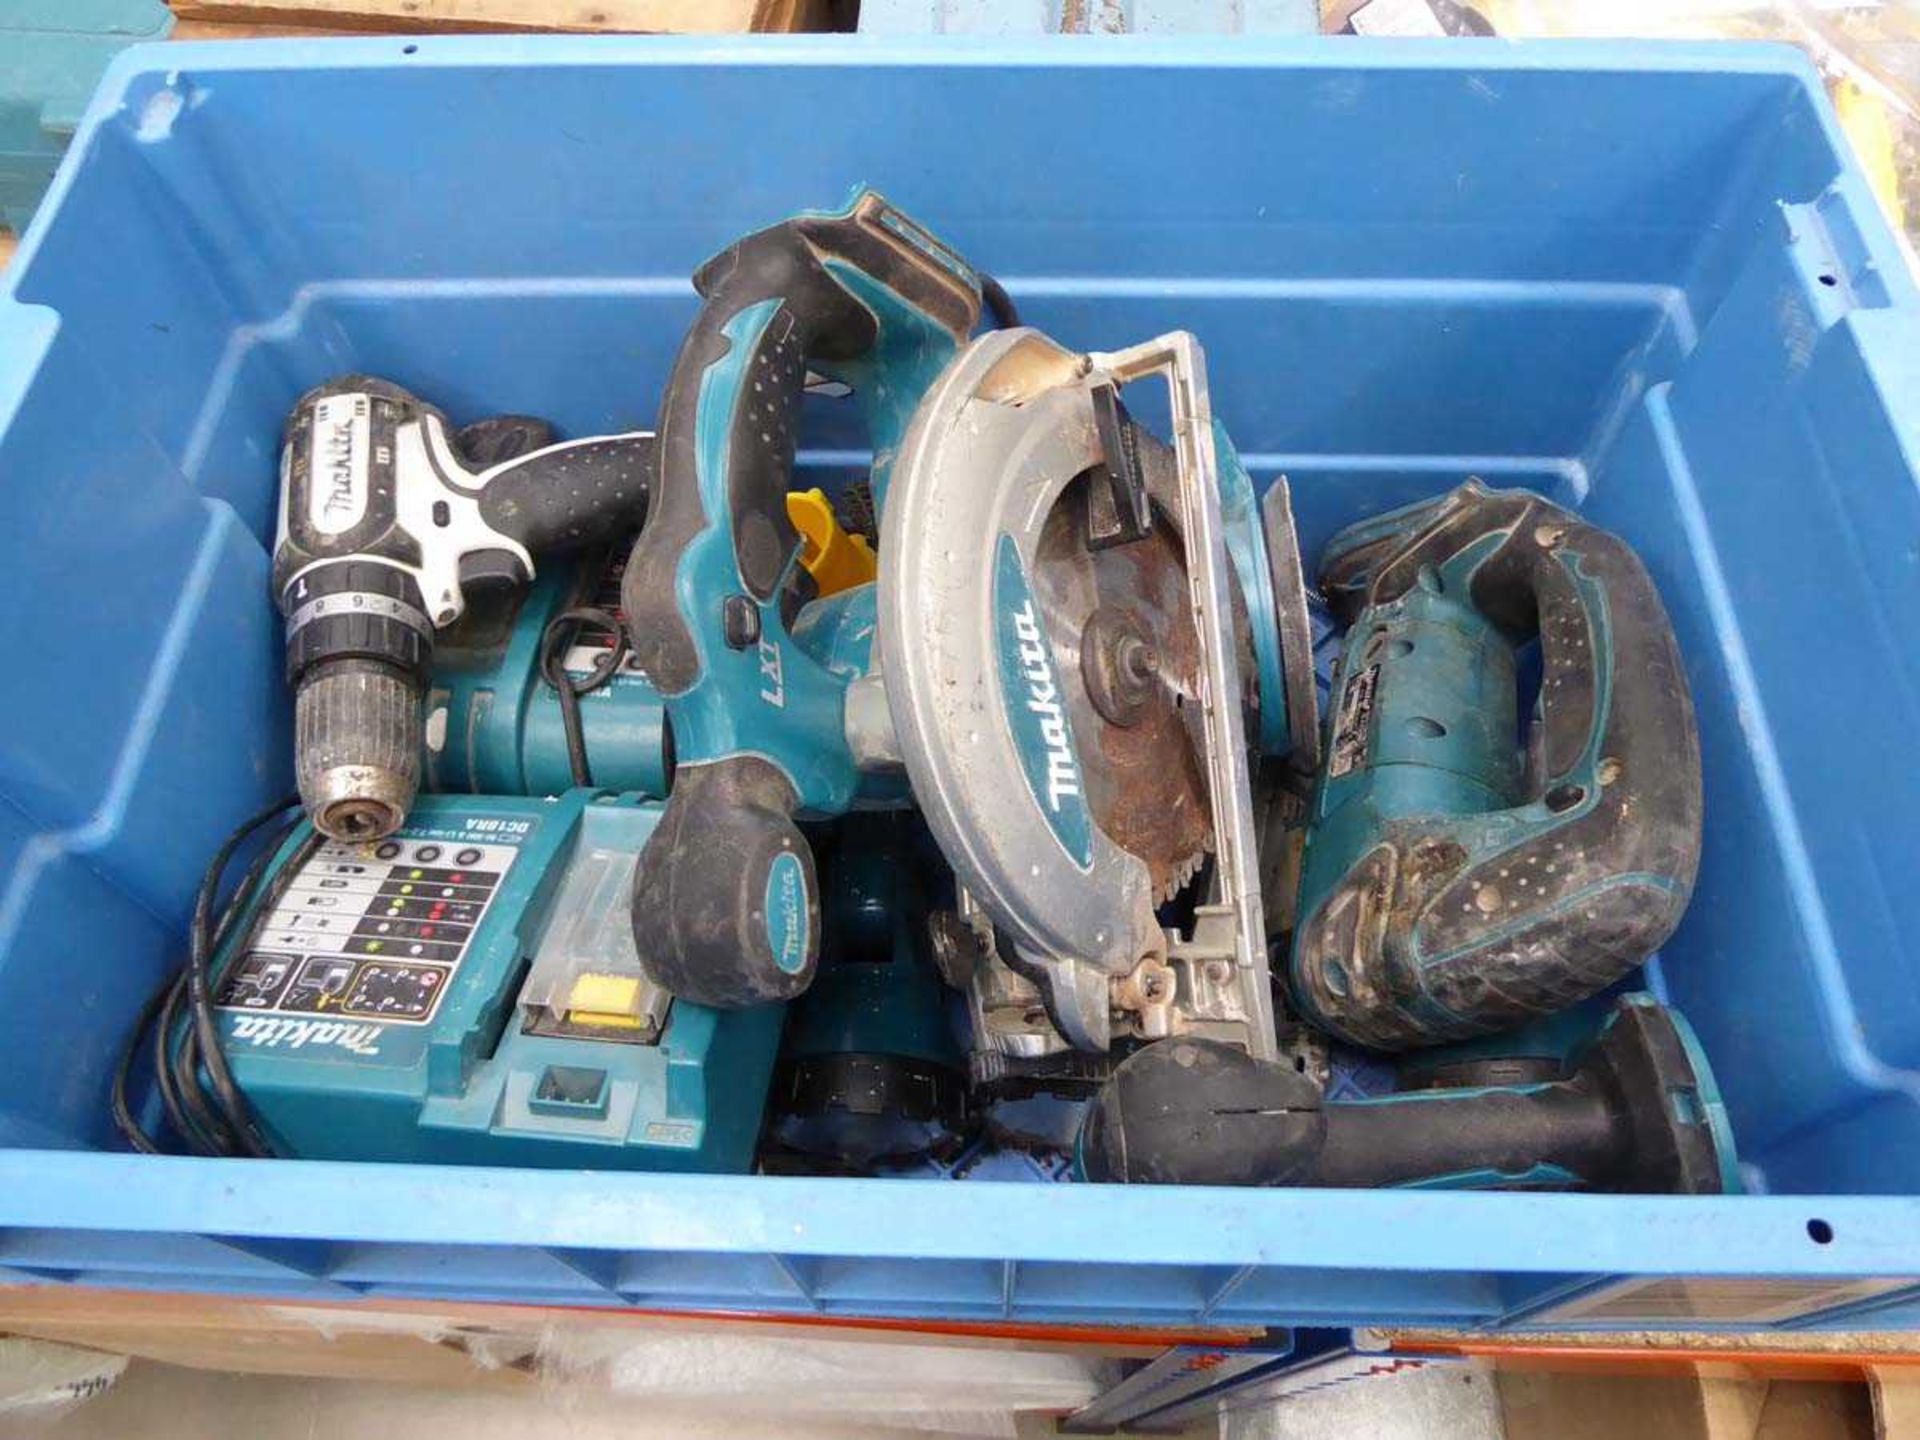 Box of Makita tools including drill, circular saw, chargers, sanders, no batteries, one charger